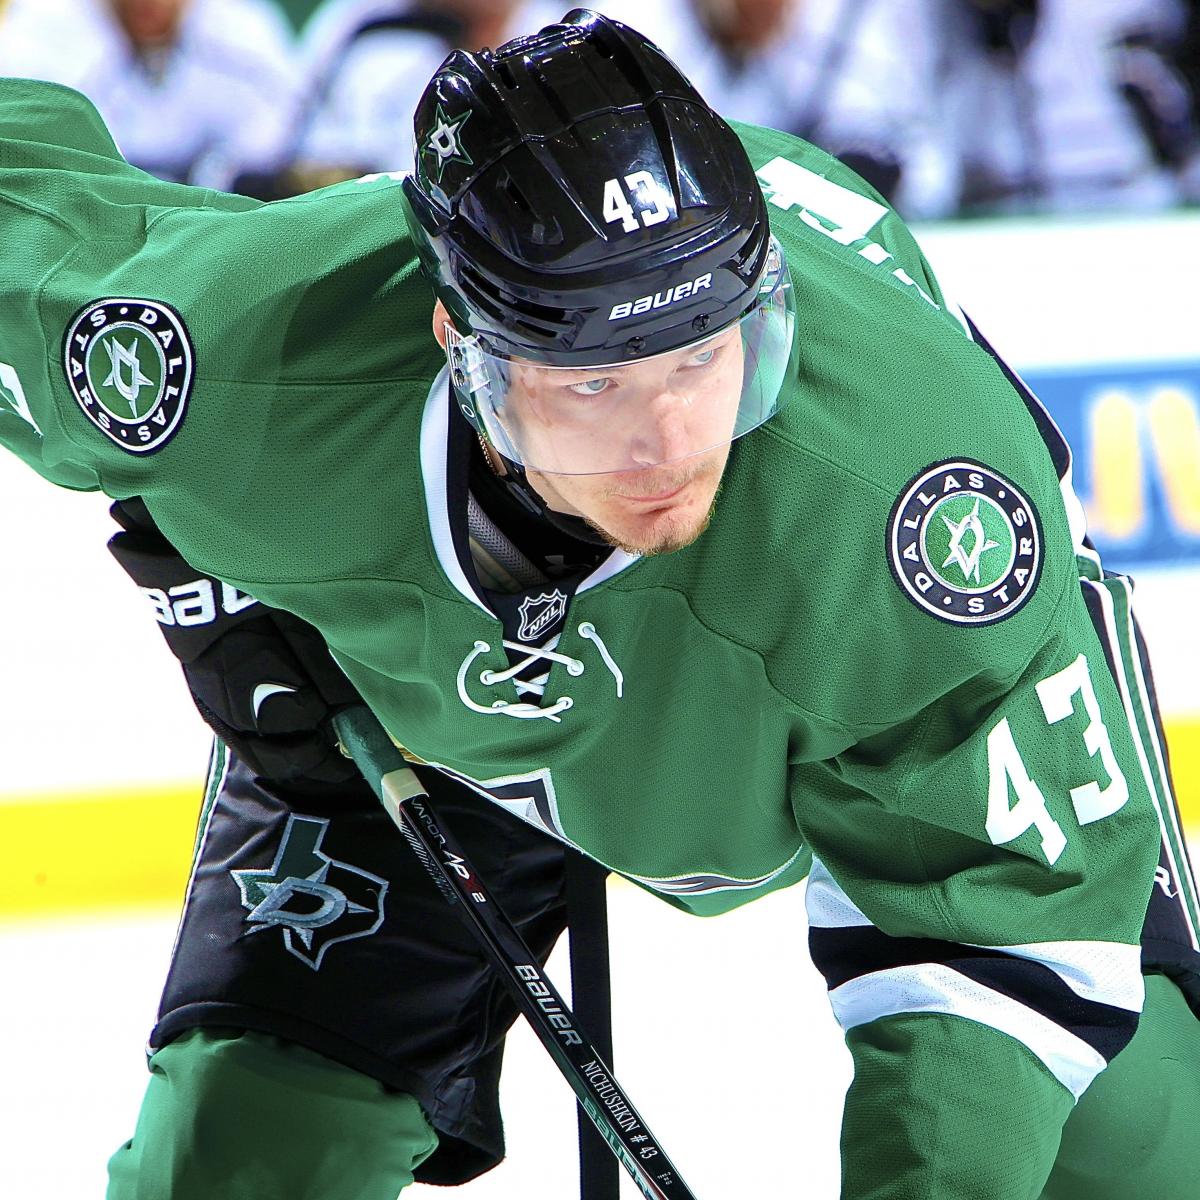 How Valeri Nichushkin, 18, Is Adjusting to American Culture & Being an